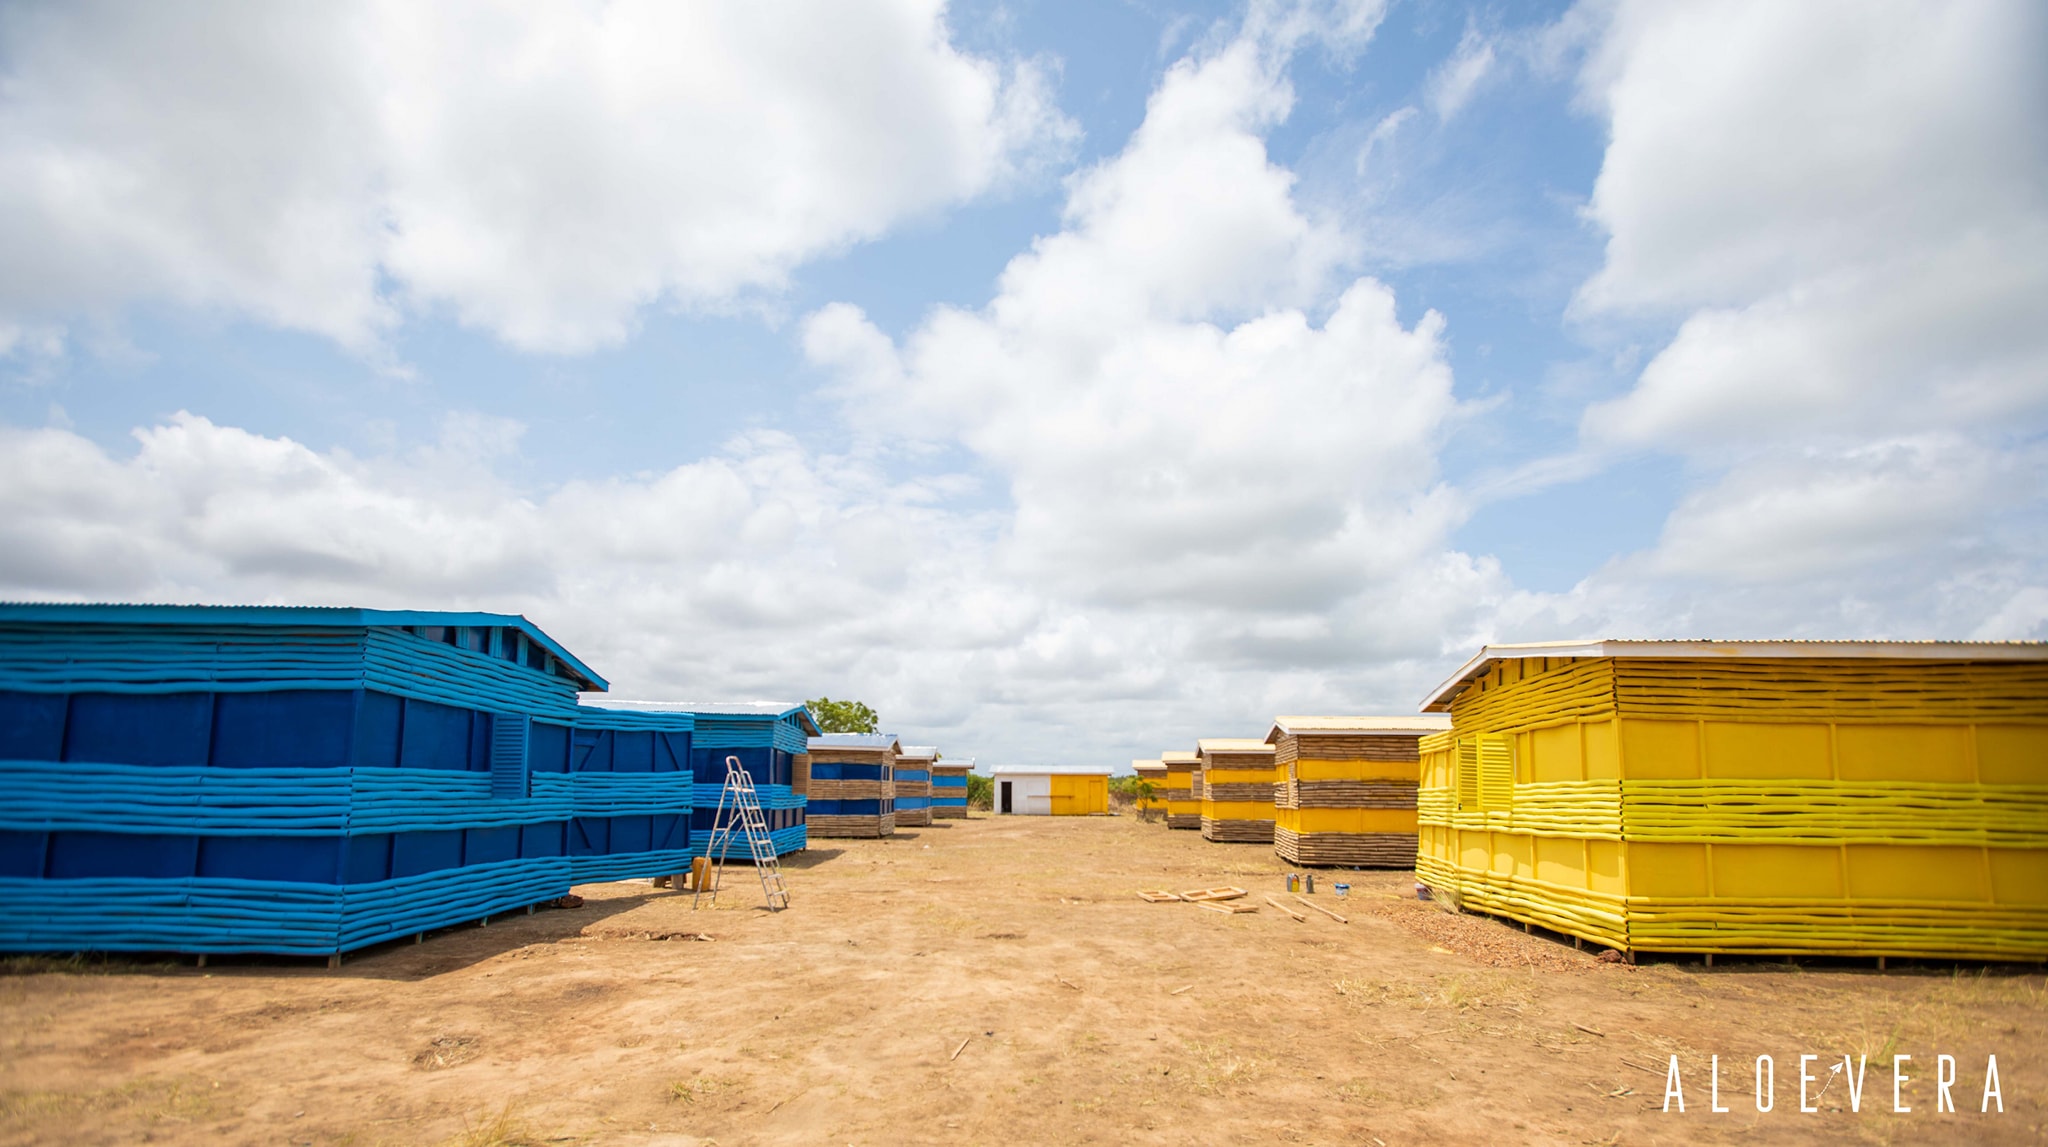 A colourful sight of yellow and blue tenements, the making of Aloe Vera Film. -PHOTOS